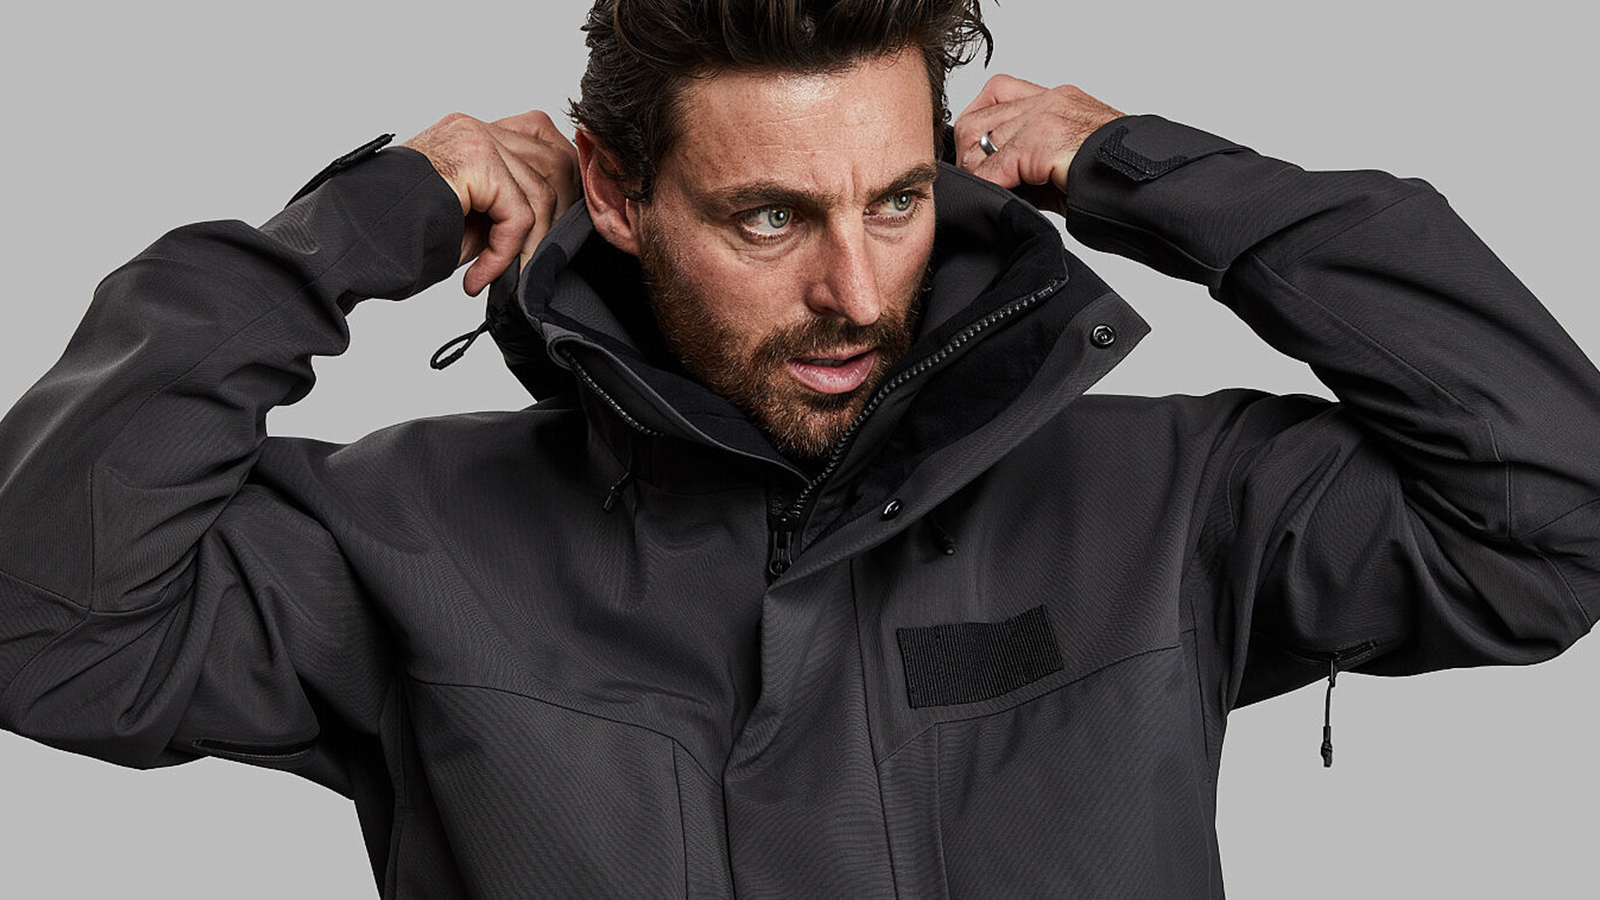 Vest privacy scout The Vollebak 100 Year Jacket Can Withstand The Toughest Environments on  Earth - IMBOLDN